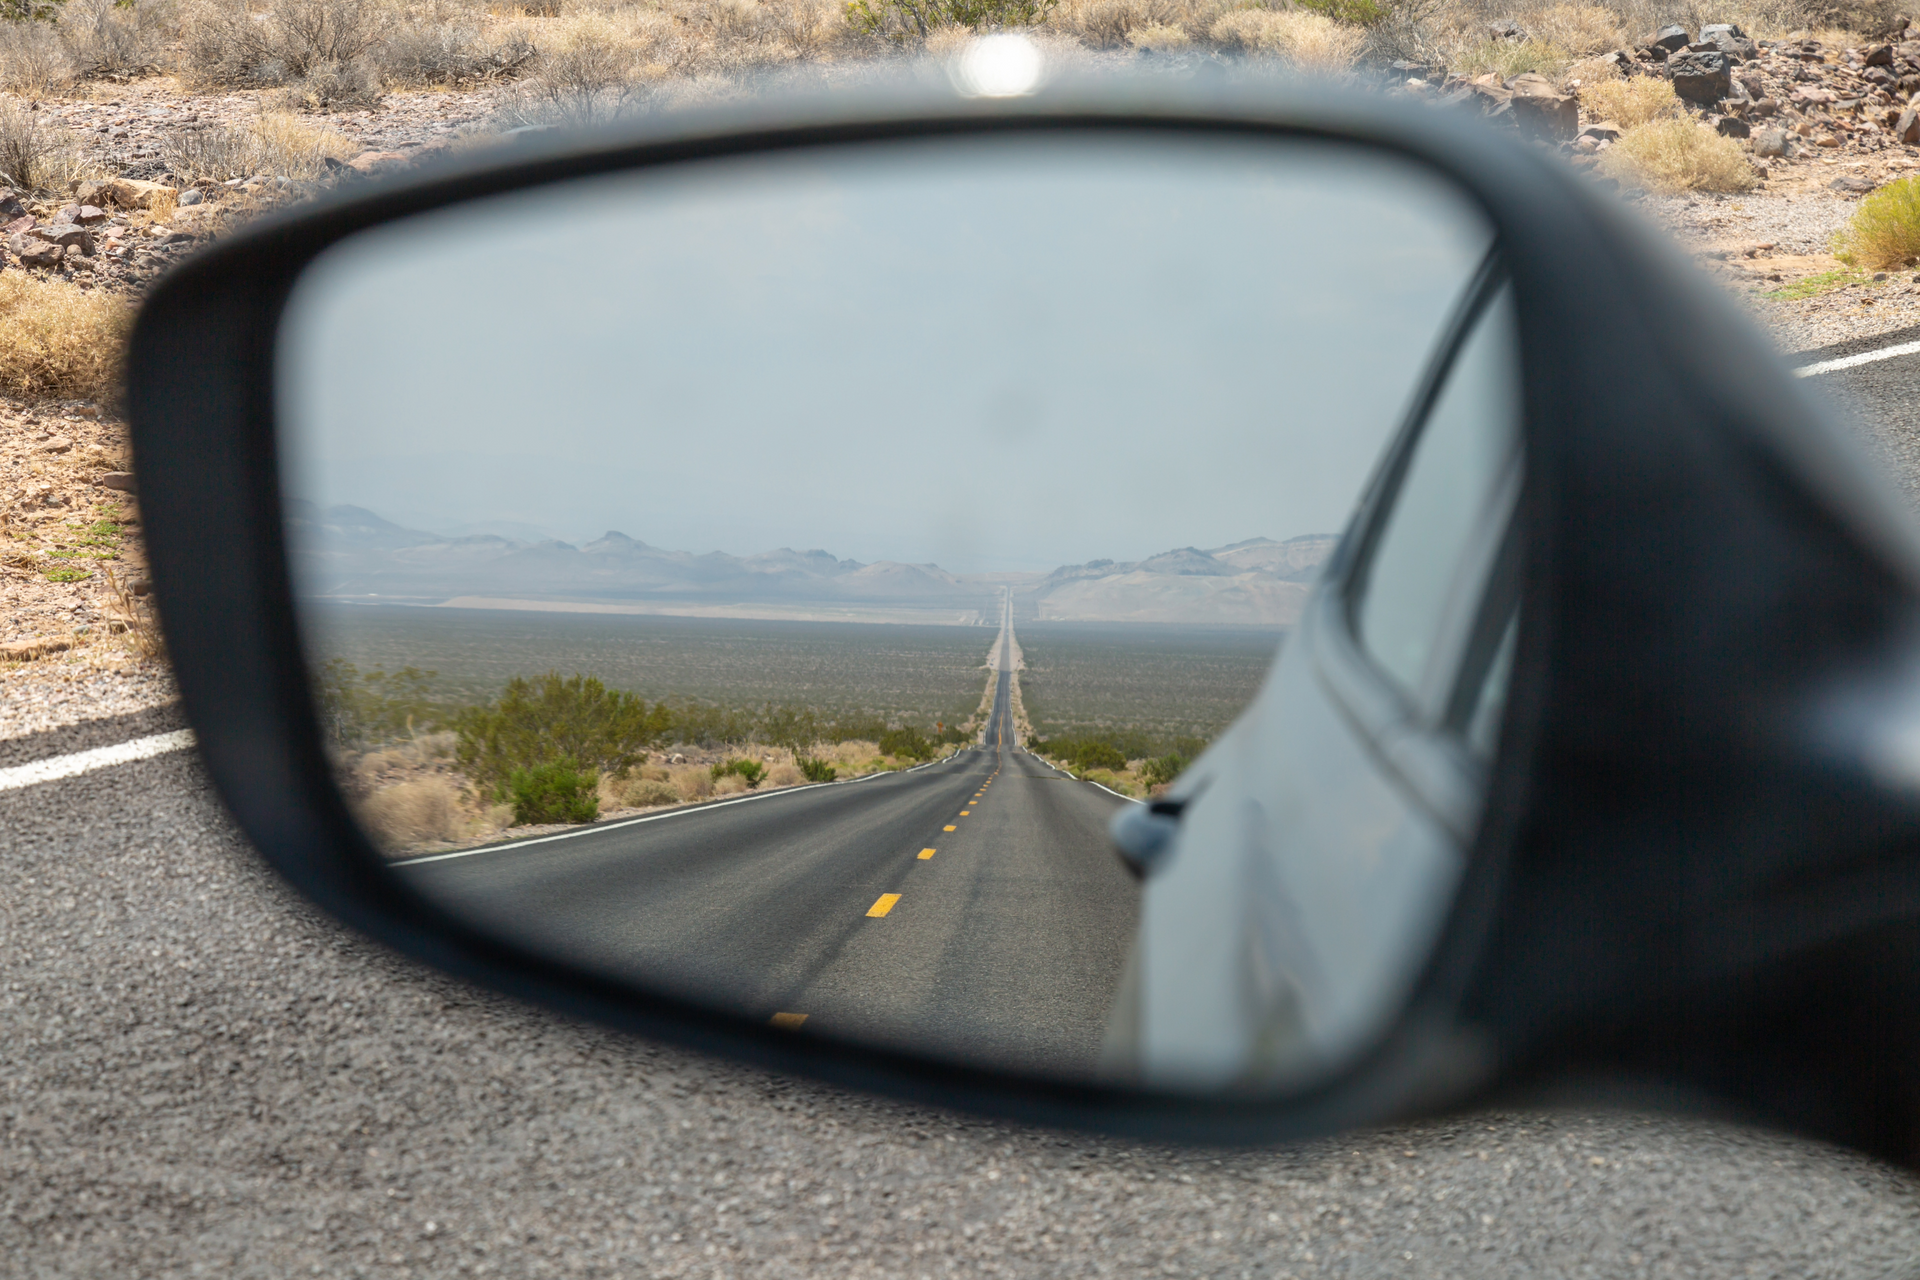 The rearview mirror where the past is prologue